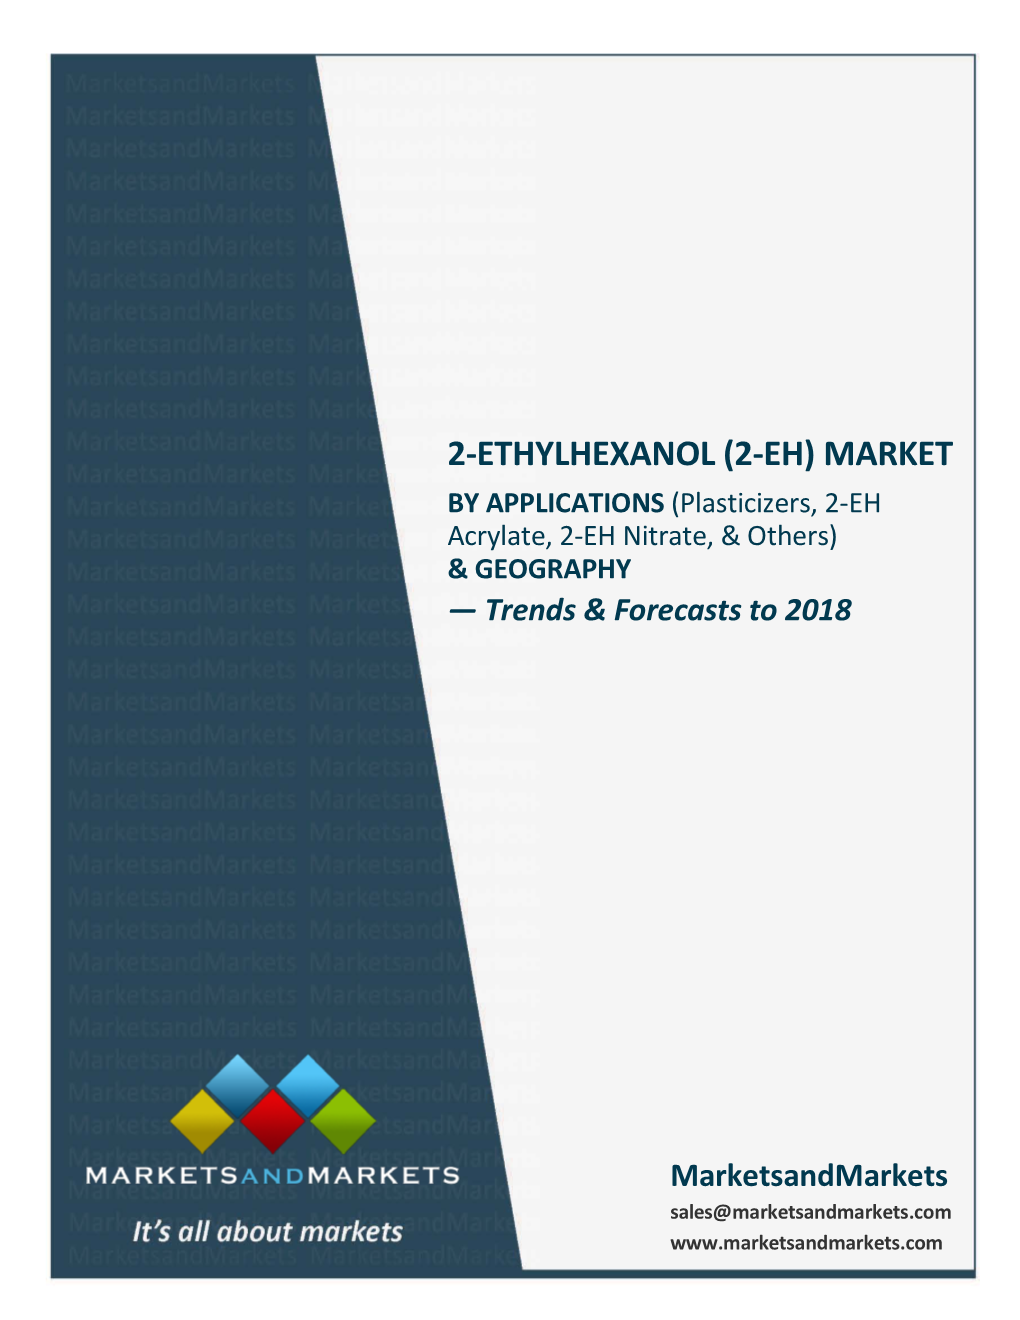 2-ETHYLHEXANOL (2-EH) MARKET by APPLICATIONS (Plasticizers, 2-EH Acrylate, 2-EH Nitrate, & Others) & GEOGRAPHY — Trends & Forecasts to 2018